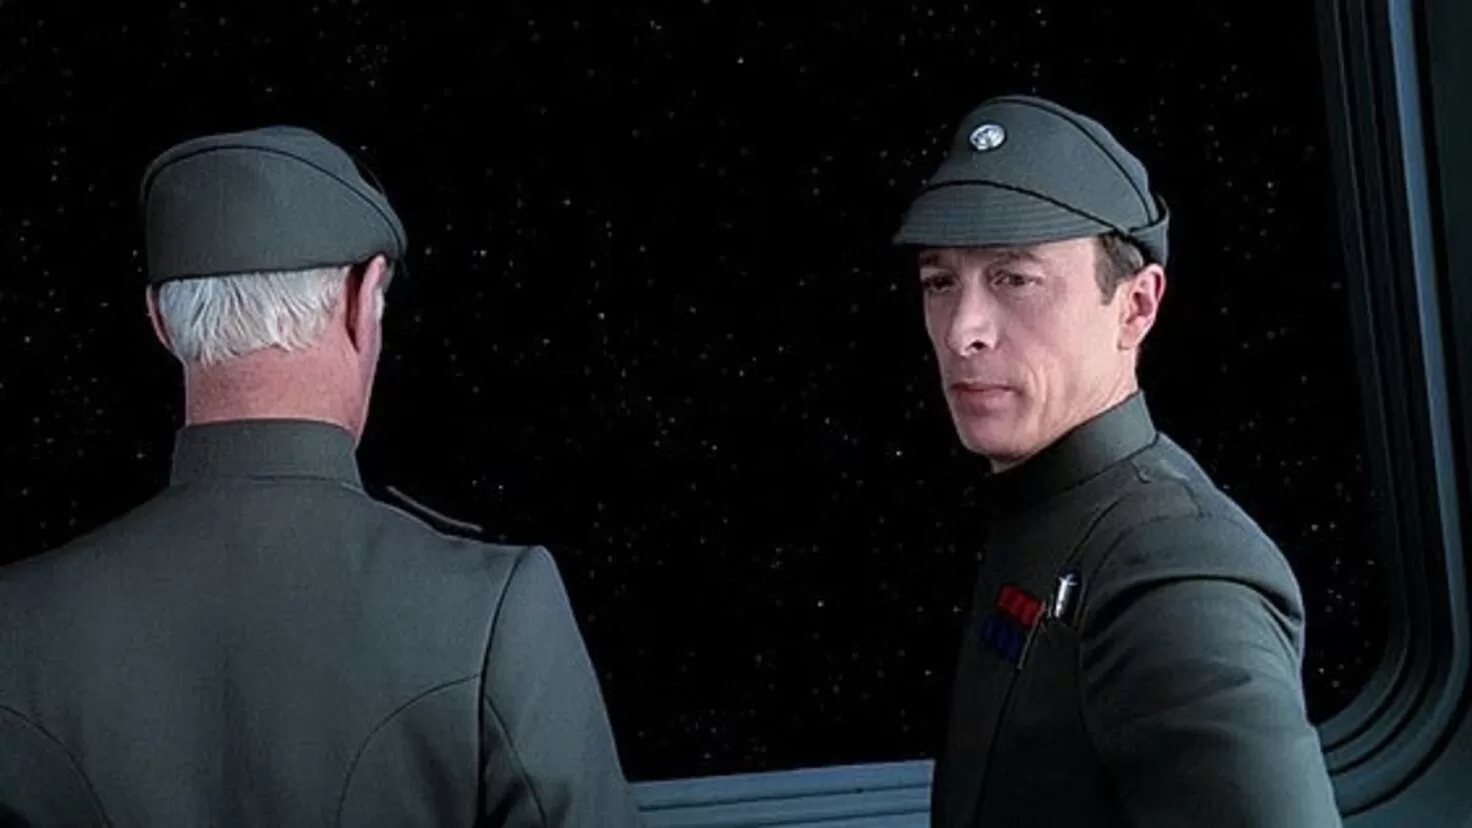 Michael Culver, from Star Wars, dies at 85
